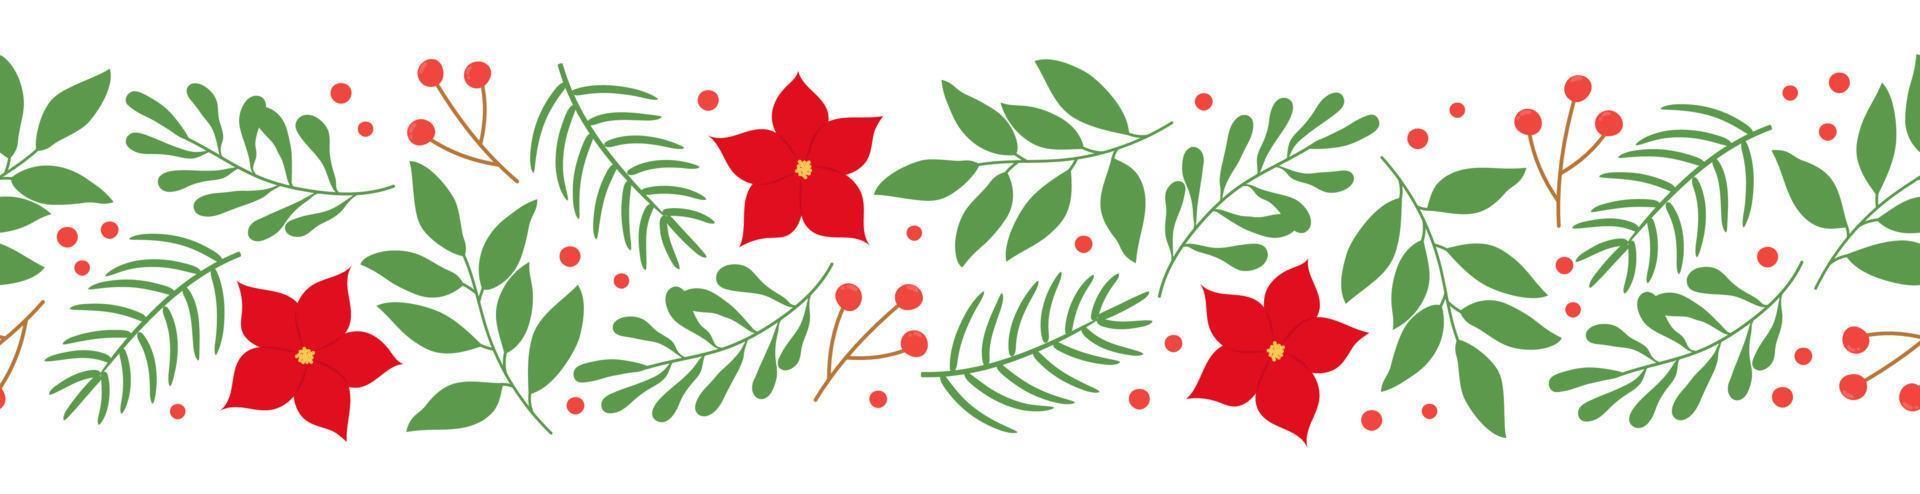 Seamless border with winter twigs and poinsettia flowers on white background. Template for winter Christmas design. vector